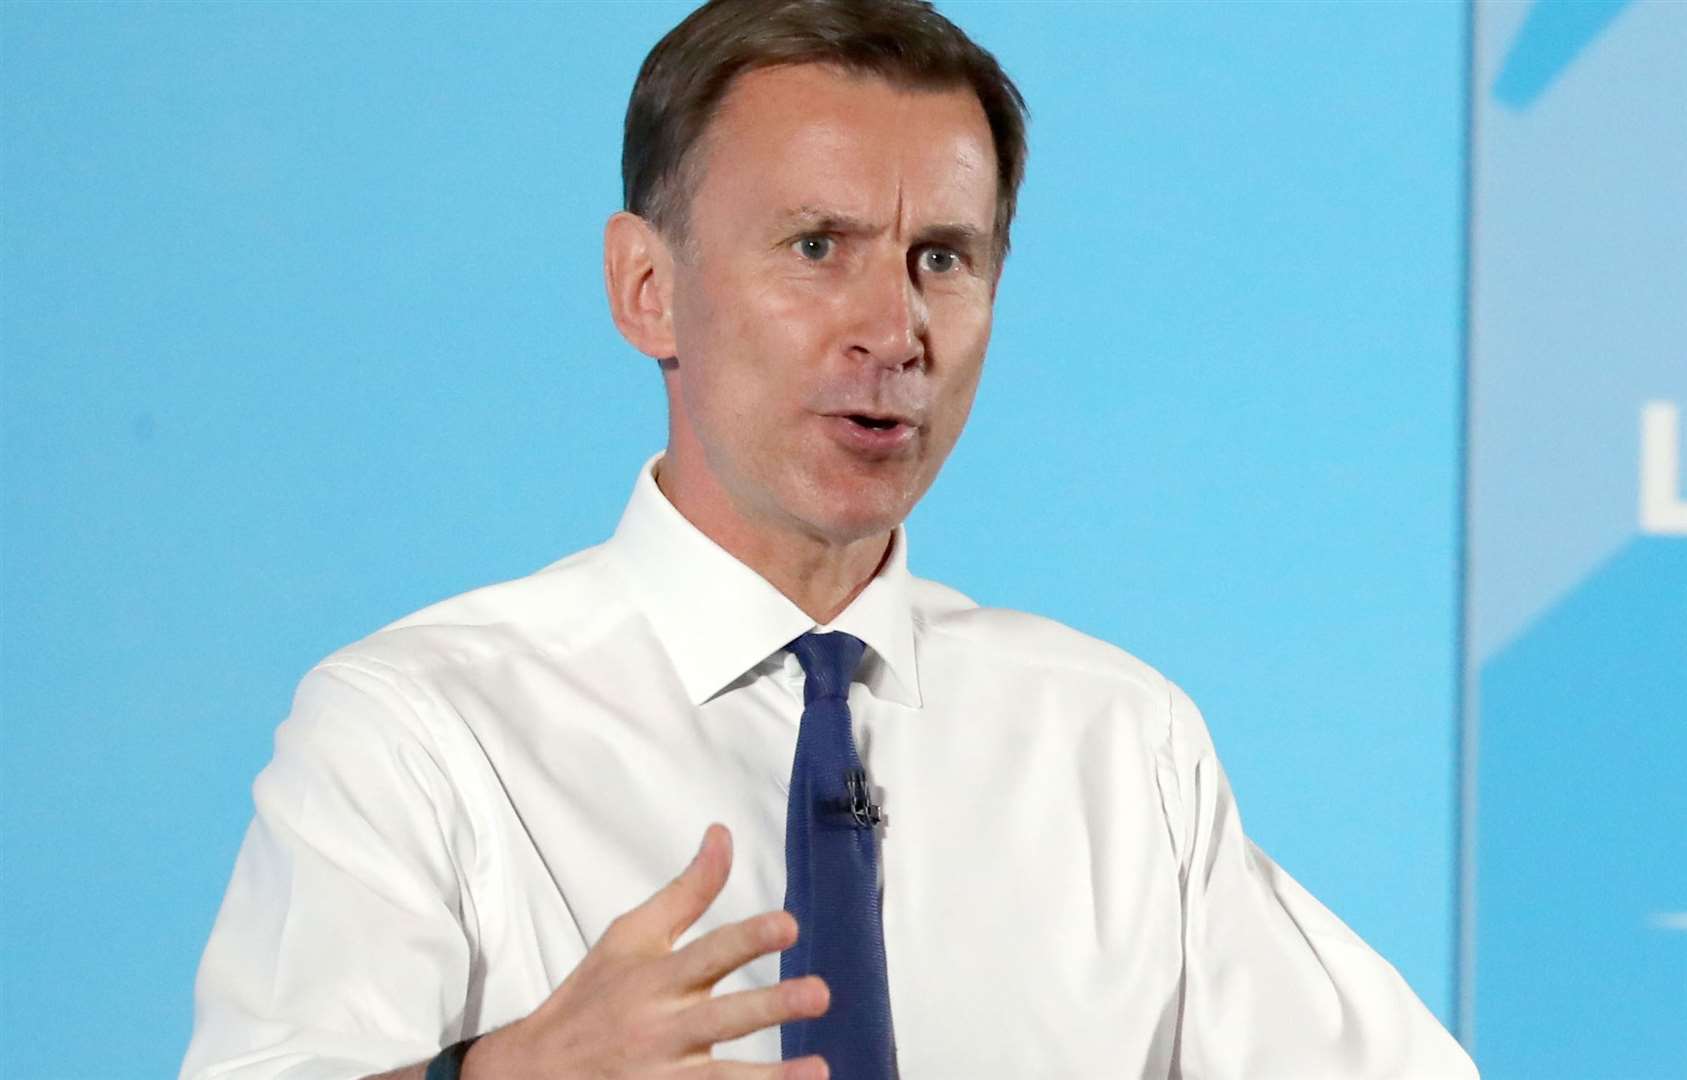 Chancellor Jeremy Hunt will appear on Friday – he was a former health secretary. Picture: Gareth Fuller/PA Wire